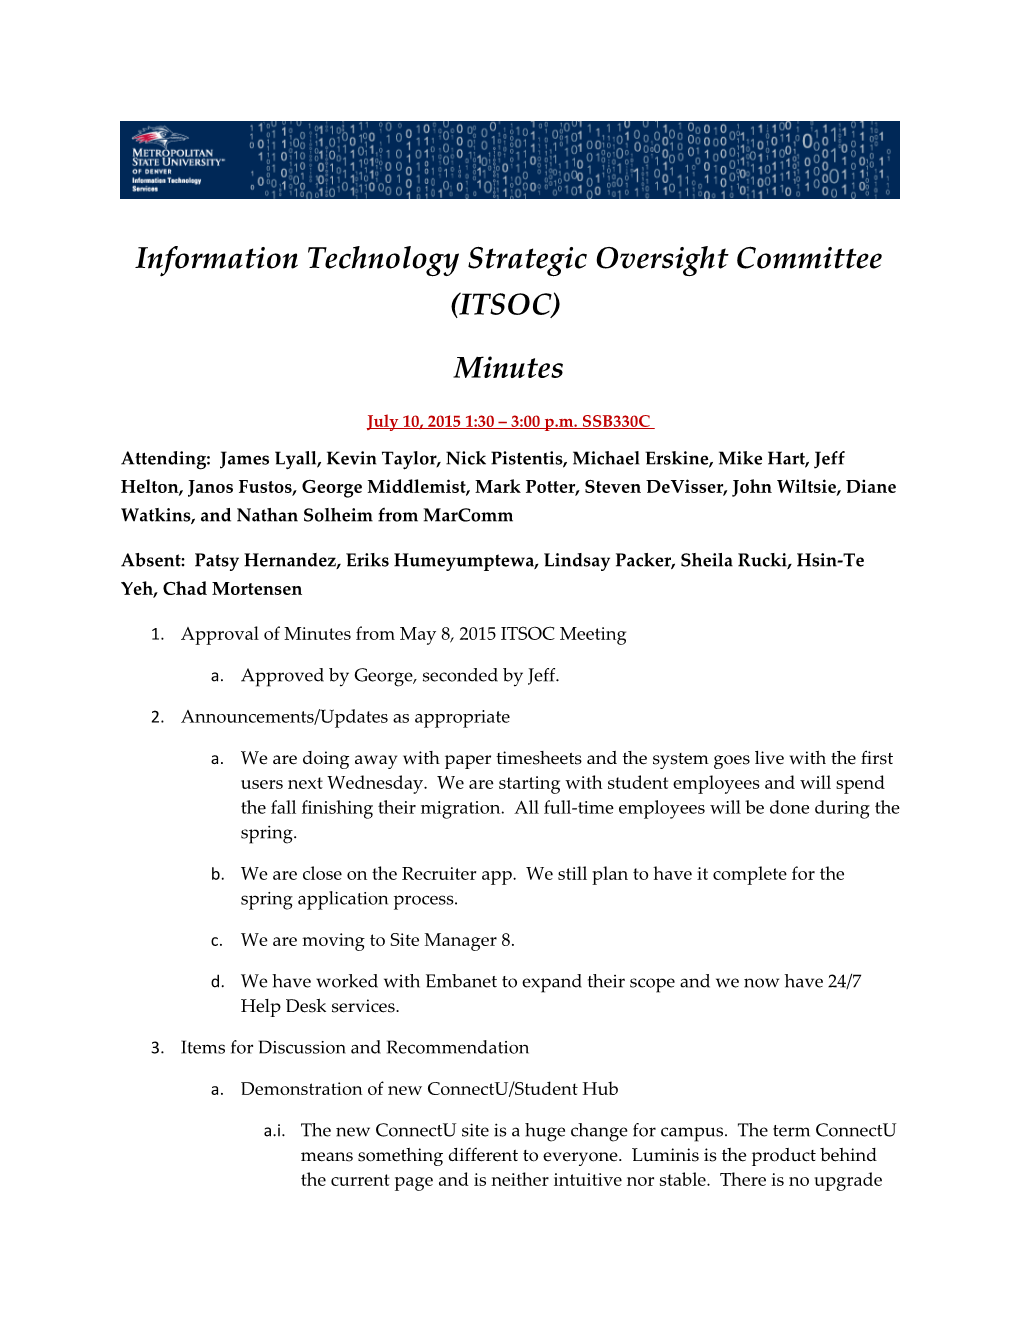 Information Technology Strategic Oversight Committee (ITSOC)